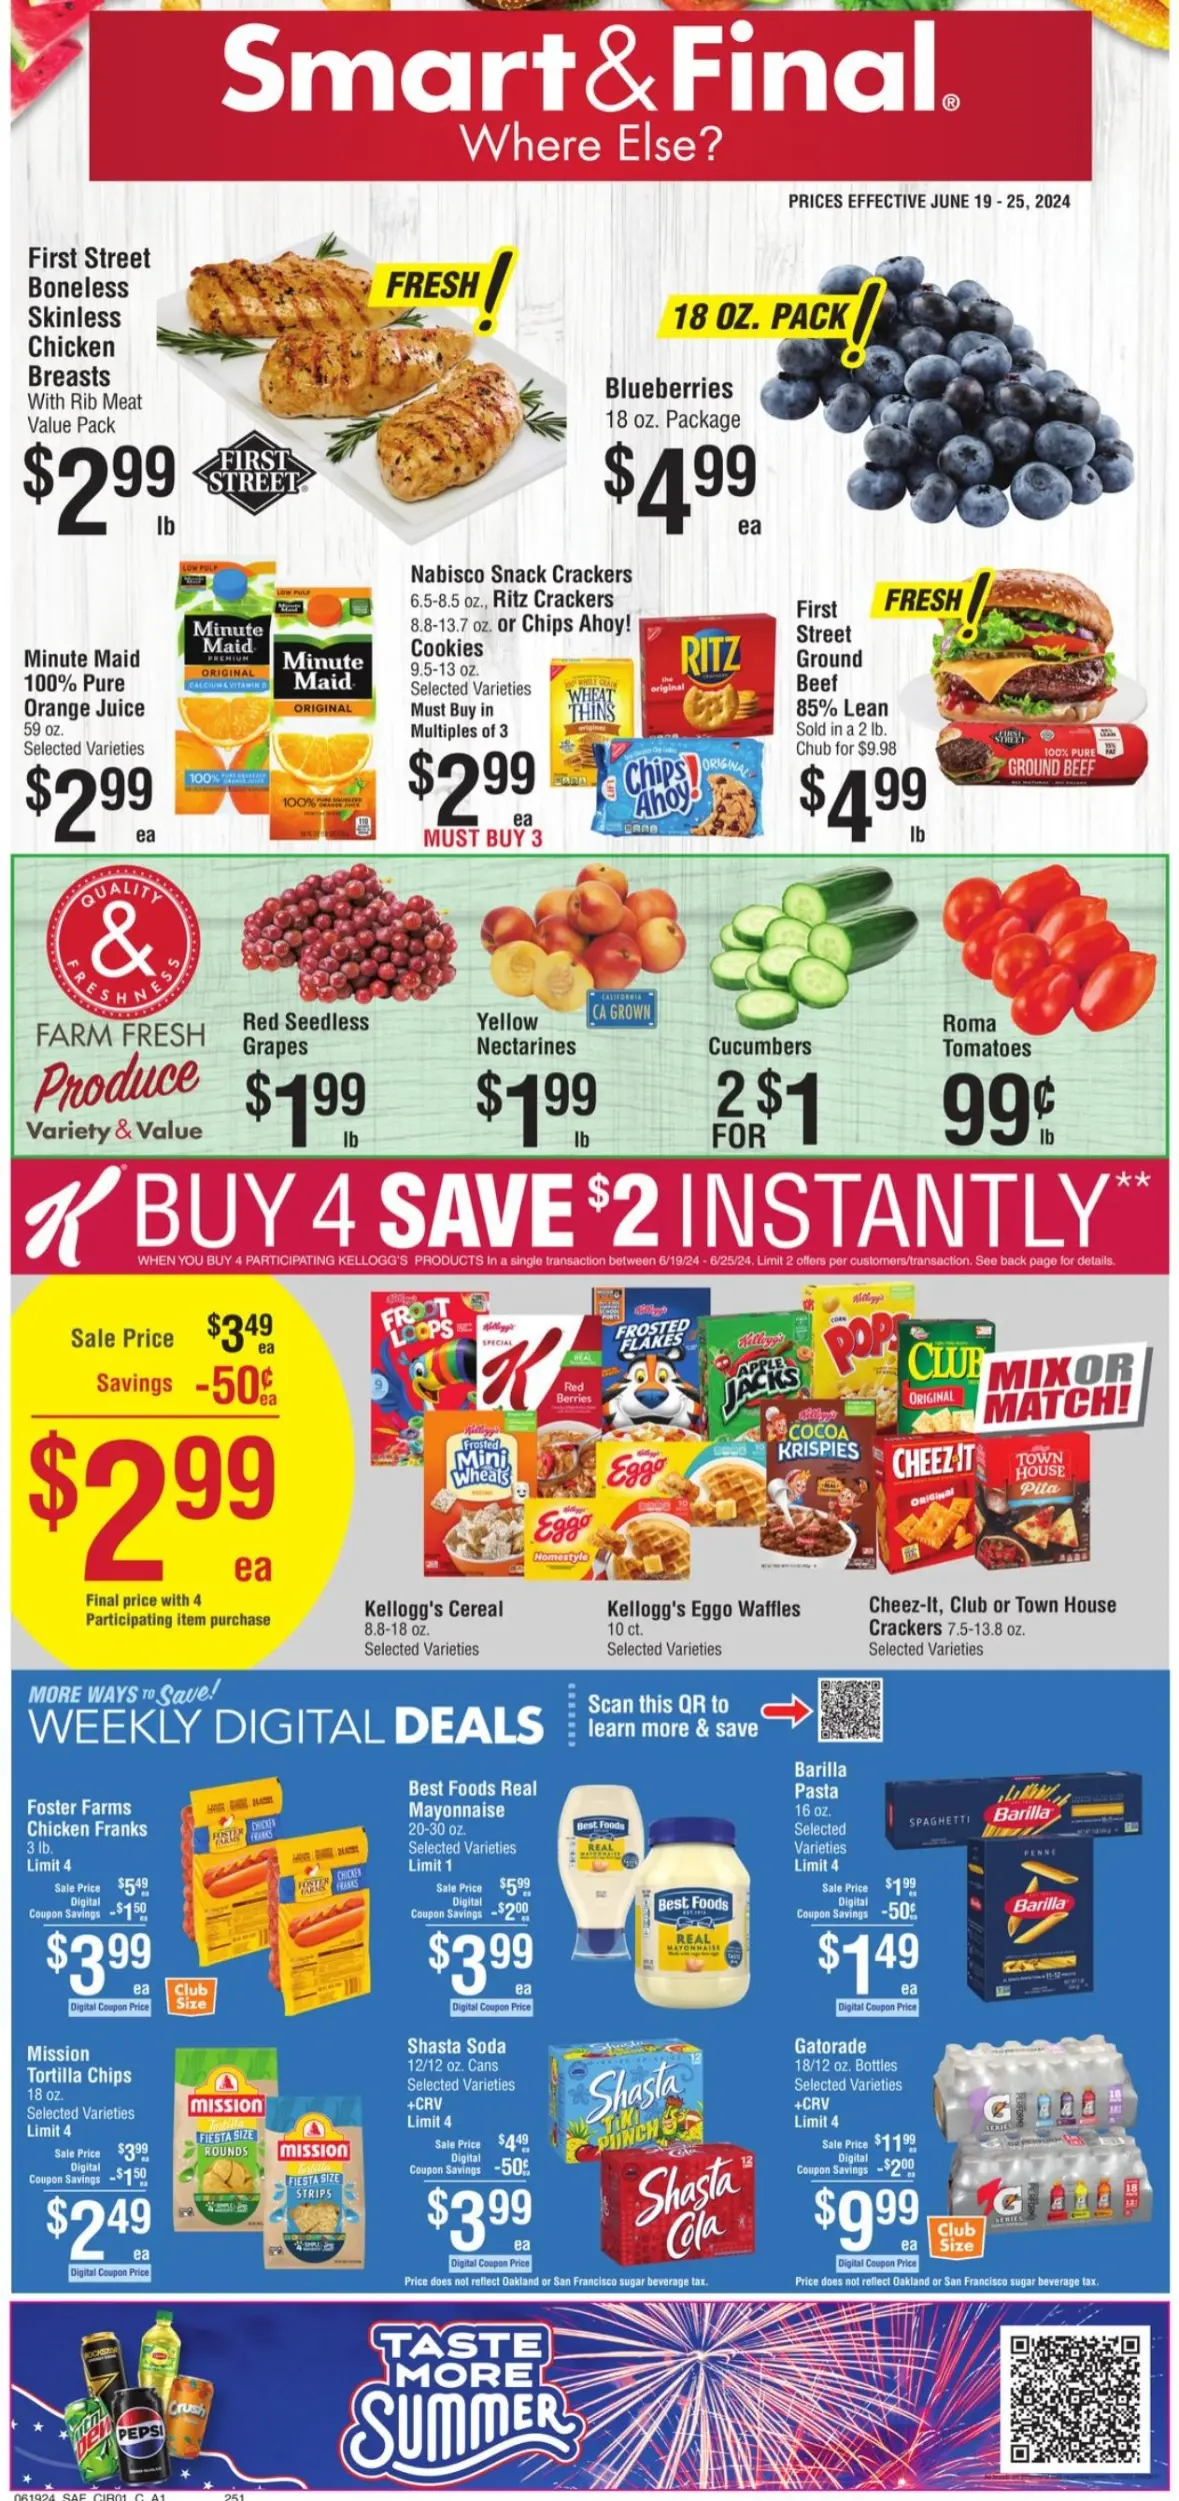 Smart and Final July 2024 Weekly Sales, Deals, Discounts and Digital Coupons.